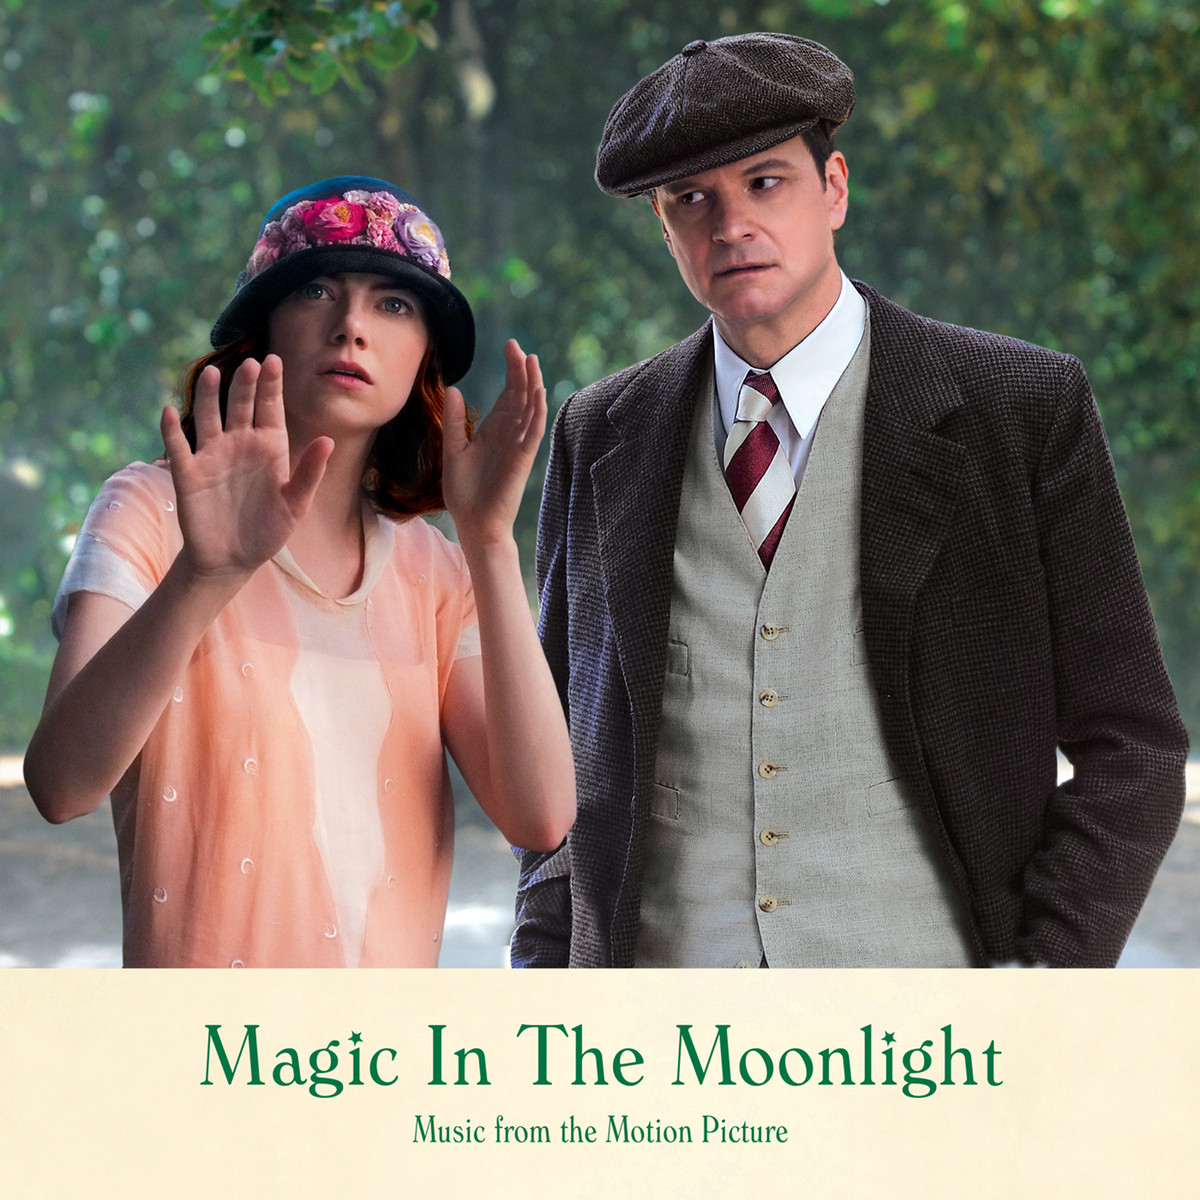 Magic In The Moonlight Soundtrack Released The Woody Allen Pages